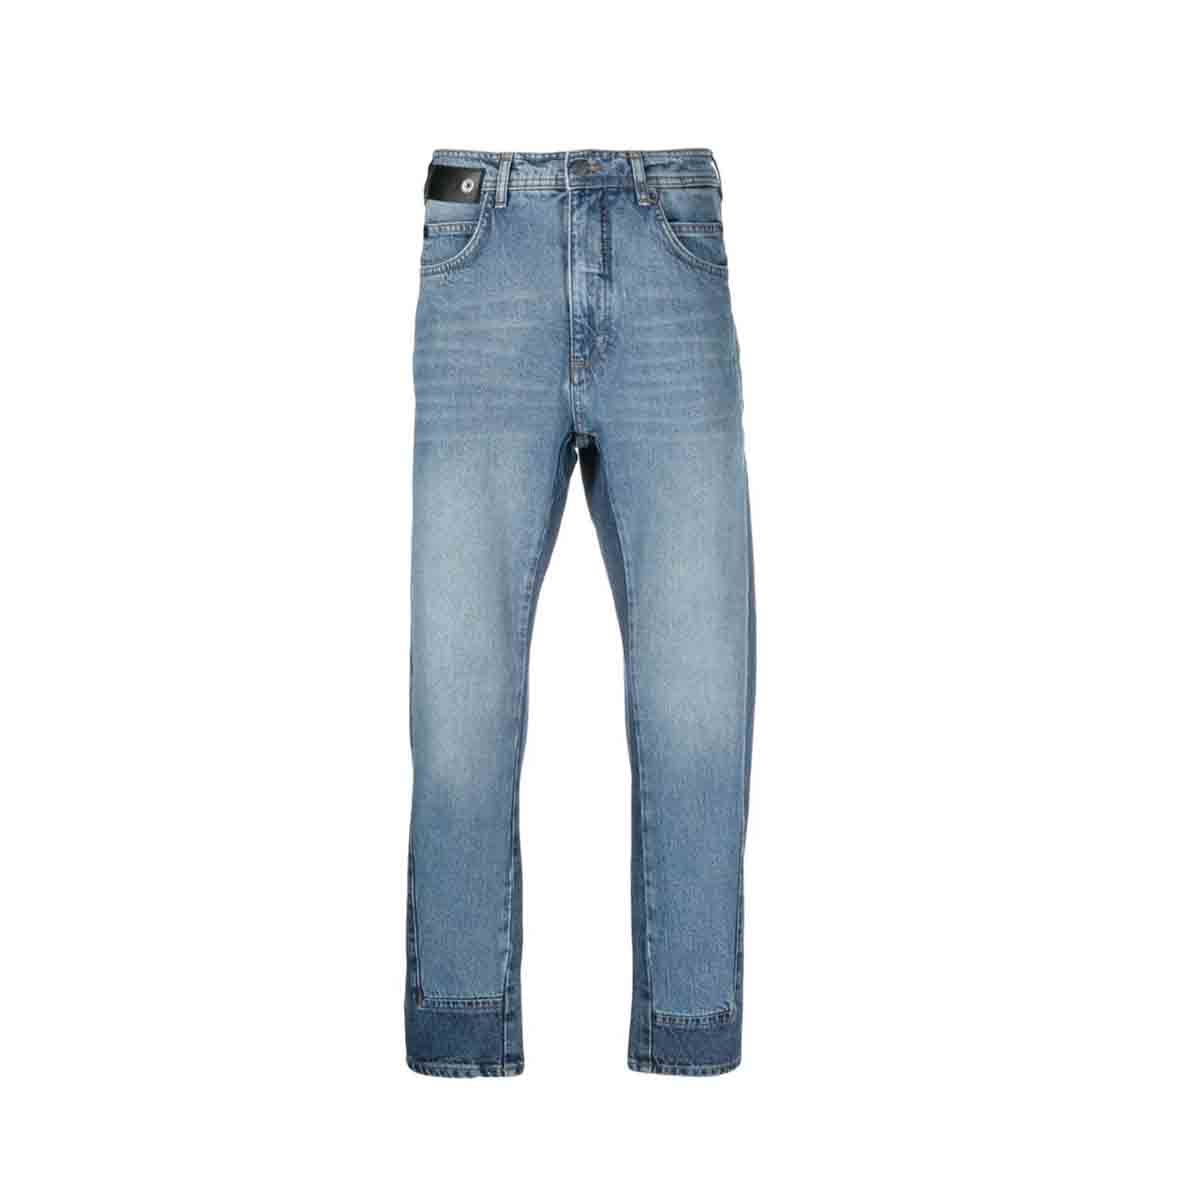 Two Tone Straight Leg Jeans